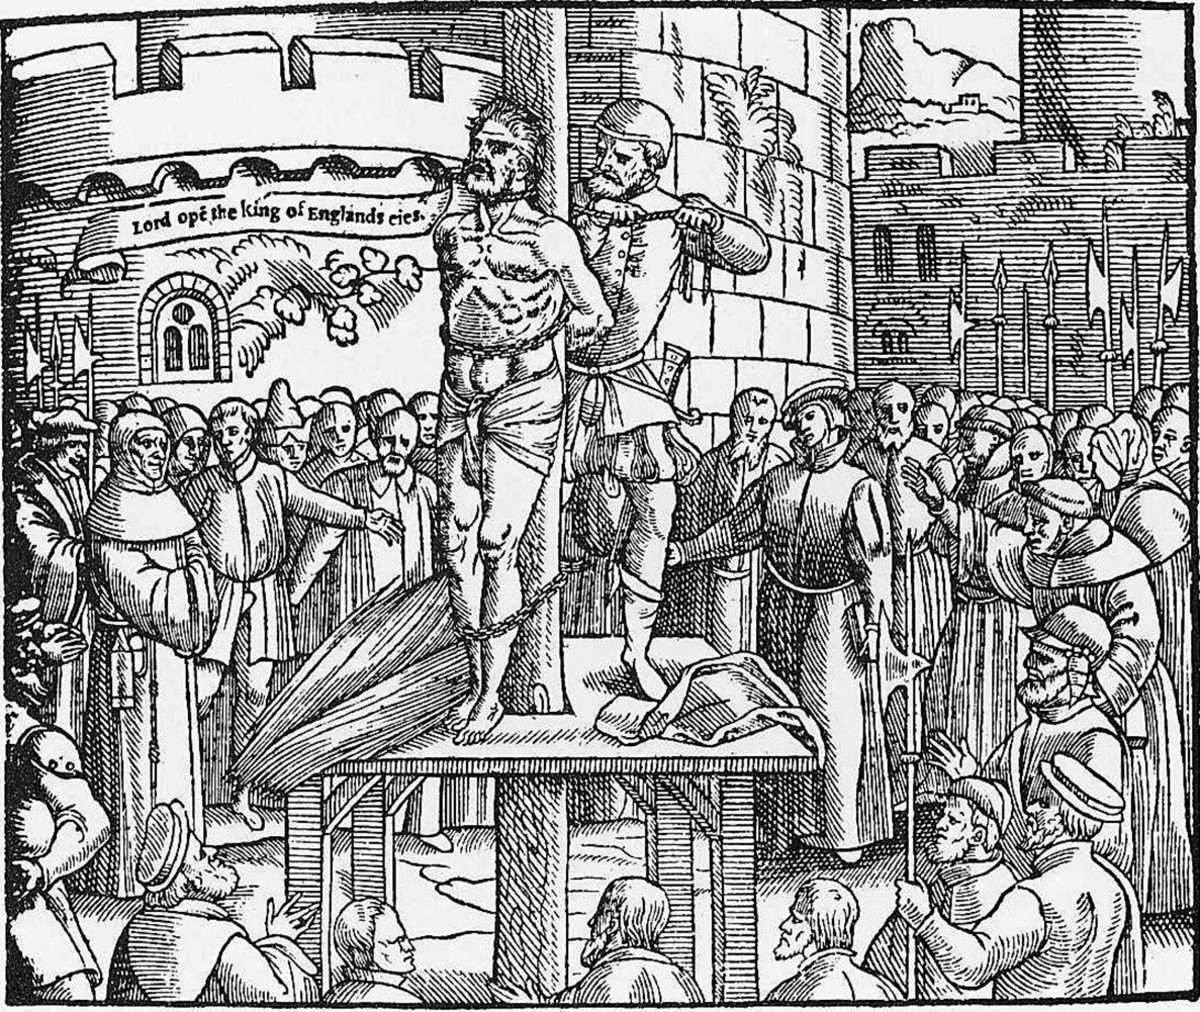 William Tyndale is strangled by his executioner prior to being burned at the stake.